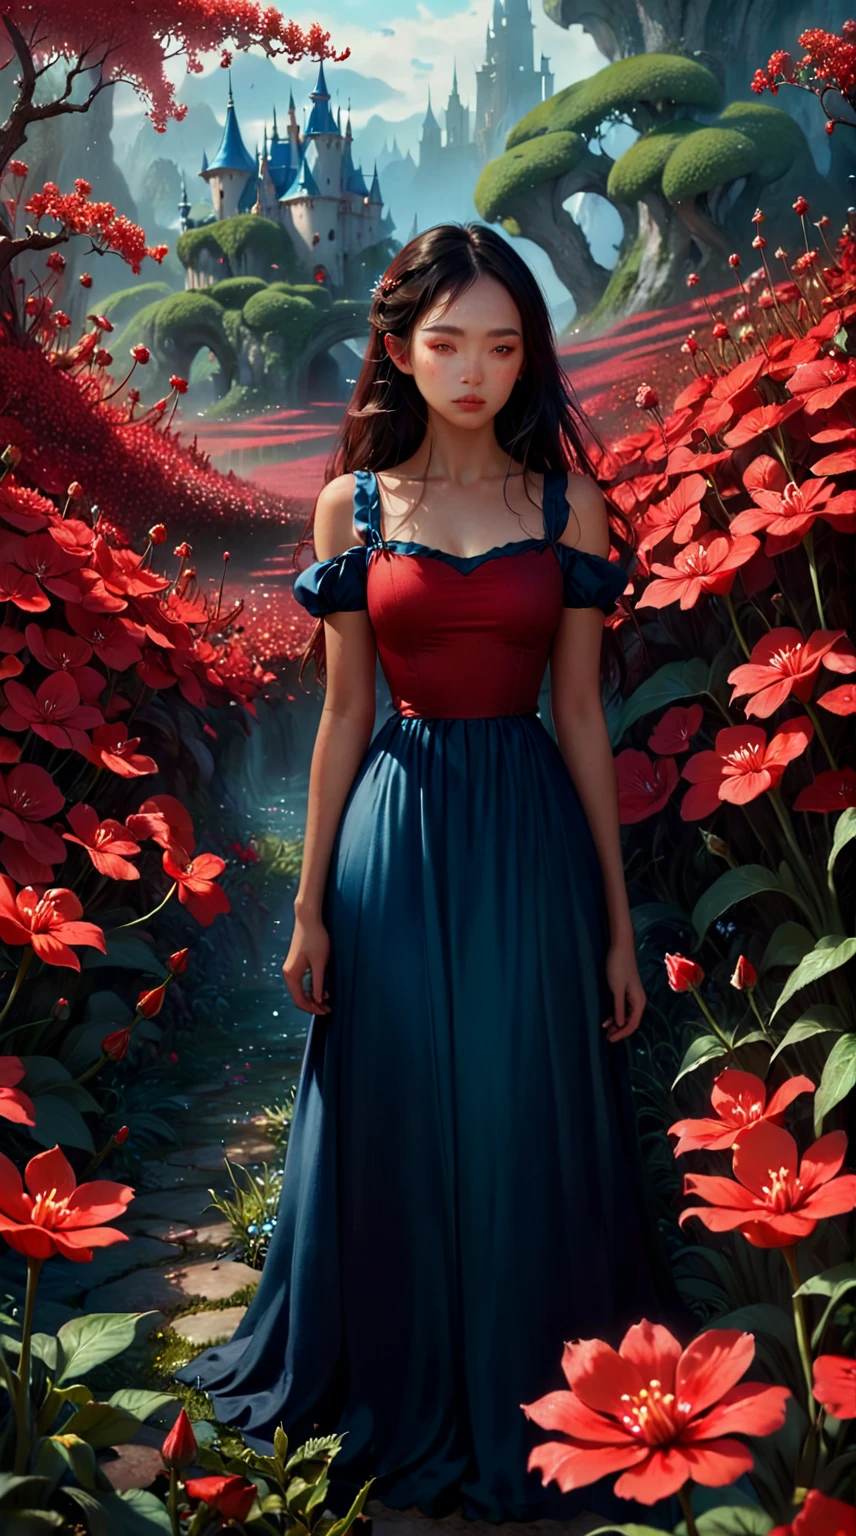 there is a woman standing in a red flower garden, lost in a dreamy fairy landscape, inspired by Jakub Schikaneder, in a red dream world, dreamlike digital painting, fantasy digital painting, jessica rossier fantasy art, alice x. zhang, beautiful art uhd 4 k, beautiful digital artwork, beautiful render of a fairytale, inspired by Andreas Rocha